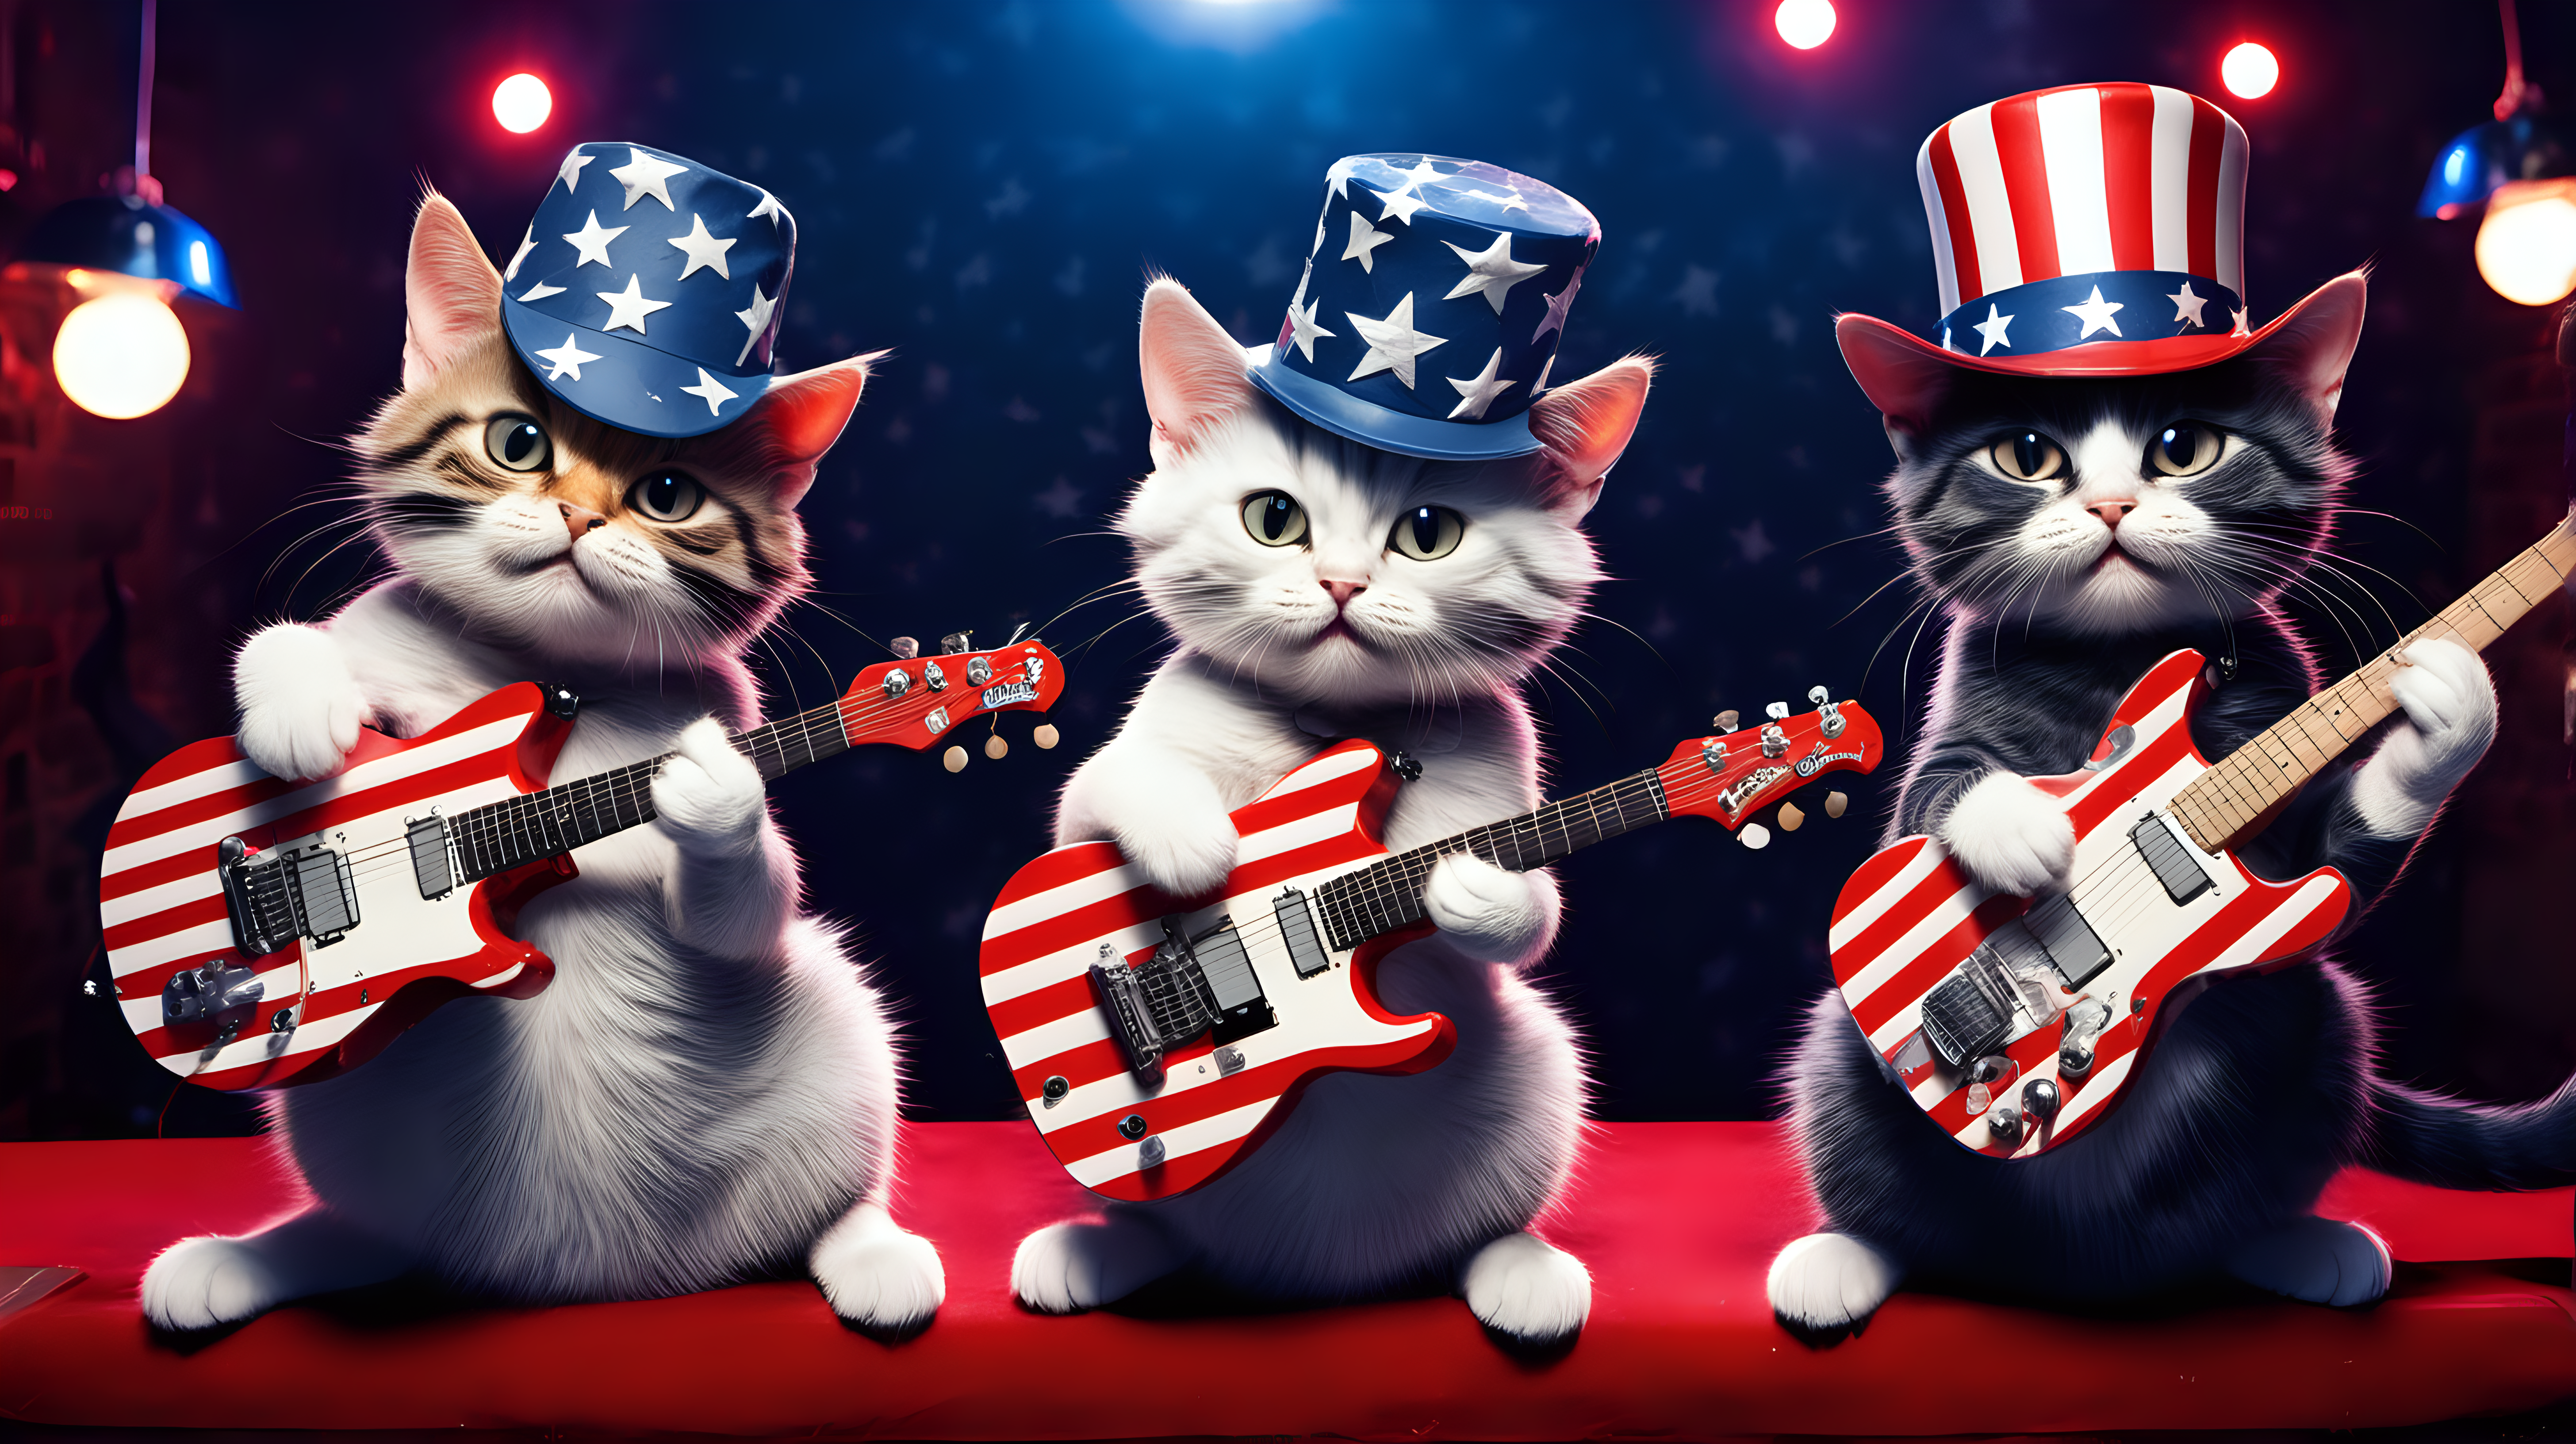 3 cats in hats playing stars and stripes guitars playing in a night club